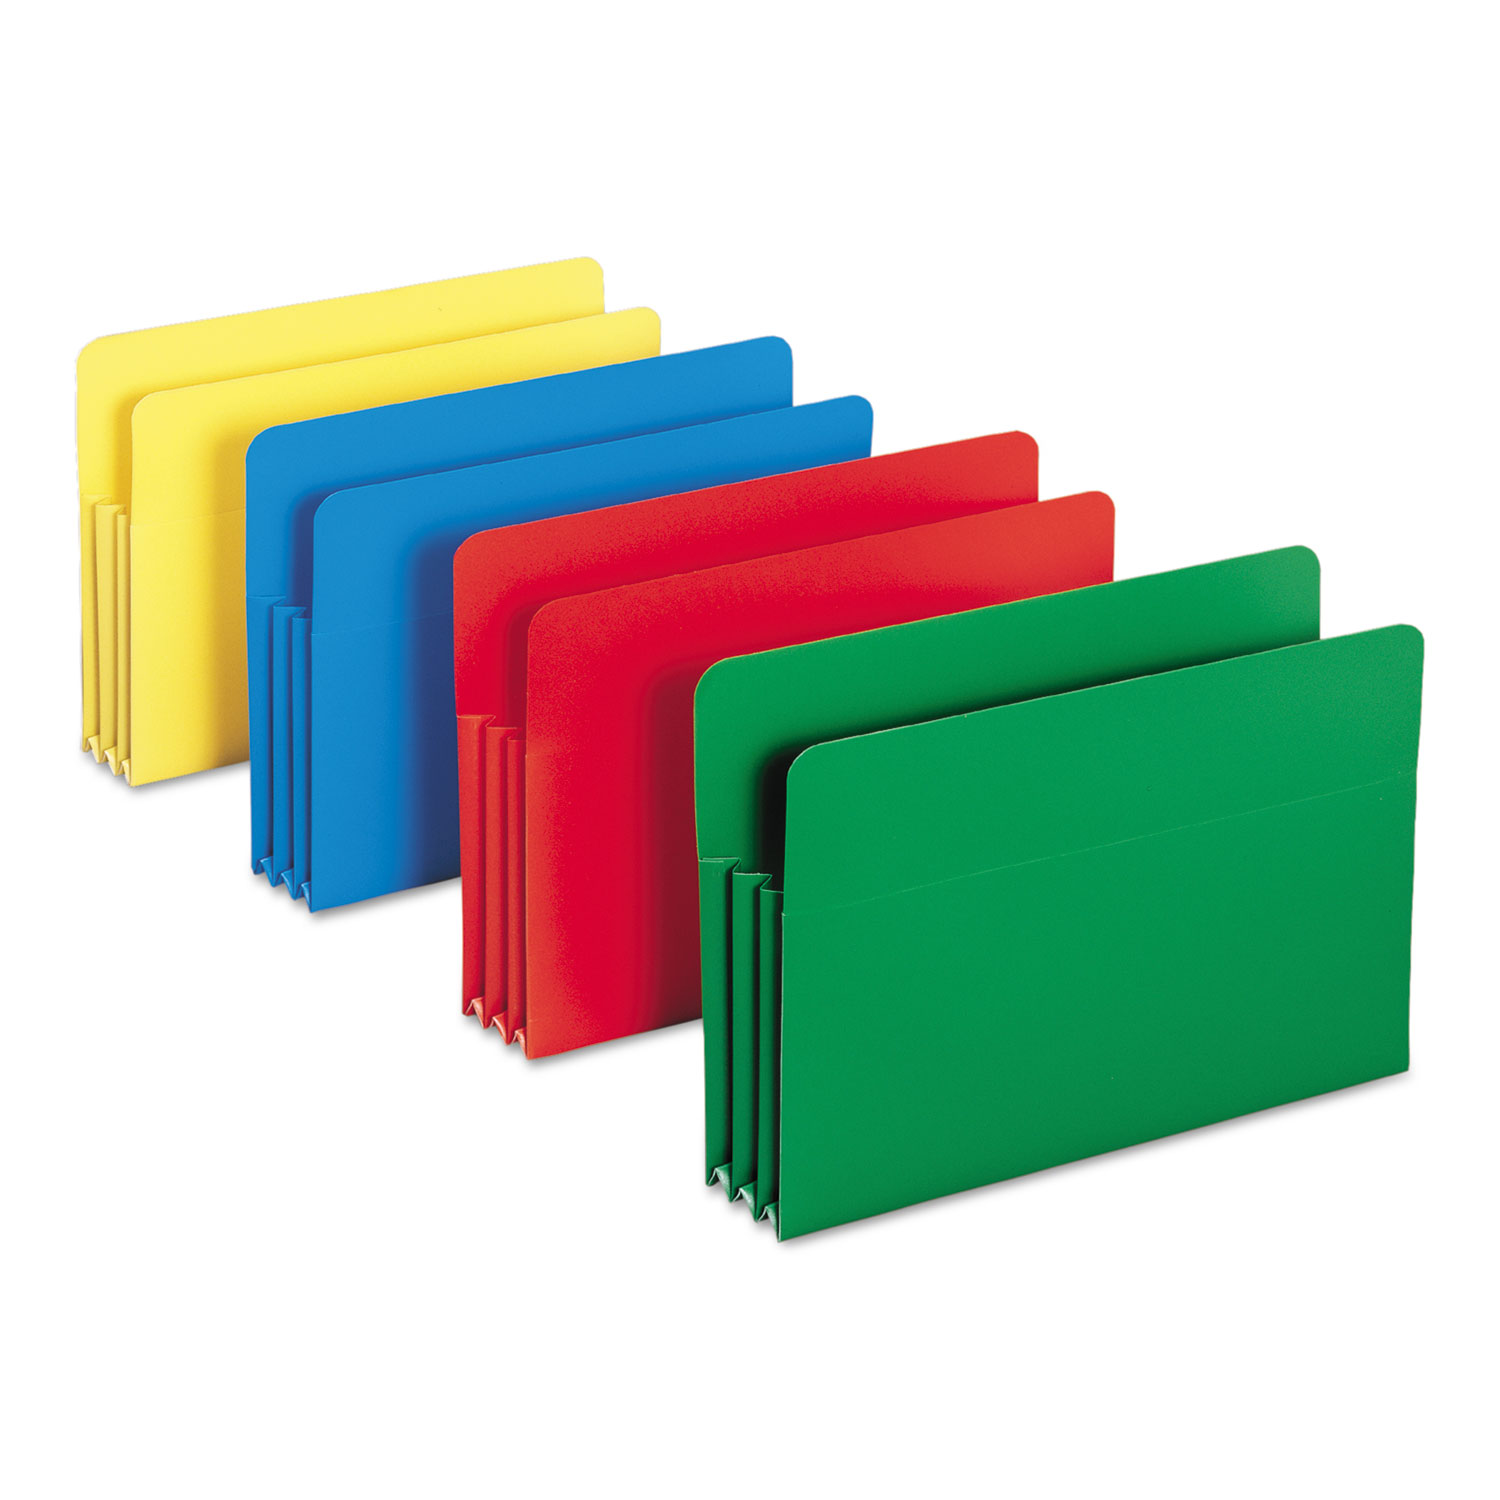  Smead 73550 Poly Drop Front File Pockets, 3.5 Expansion, 4 Sections, Legal Size, Assorted, 4/Box (SMD73550) 